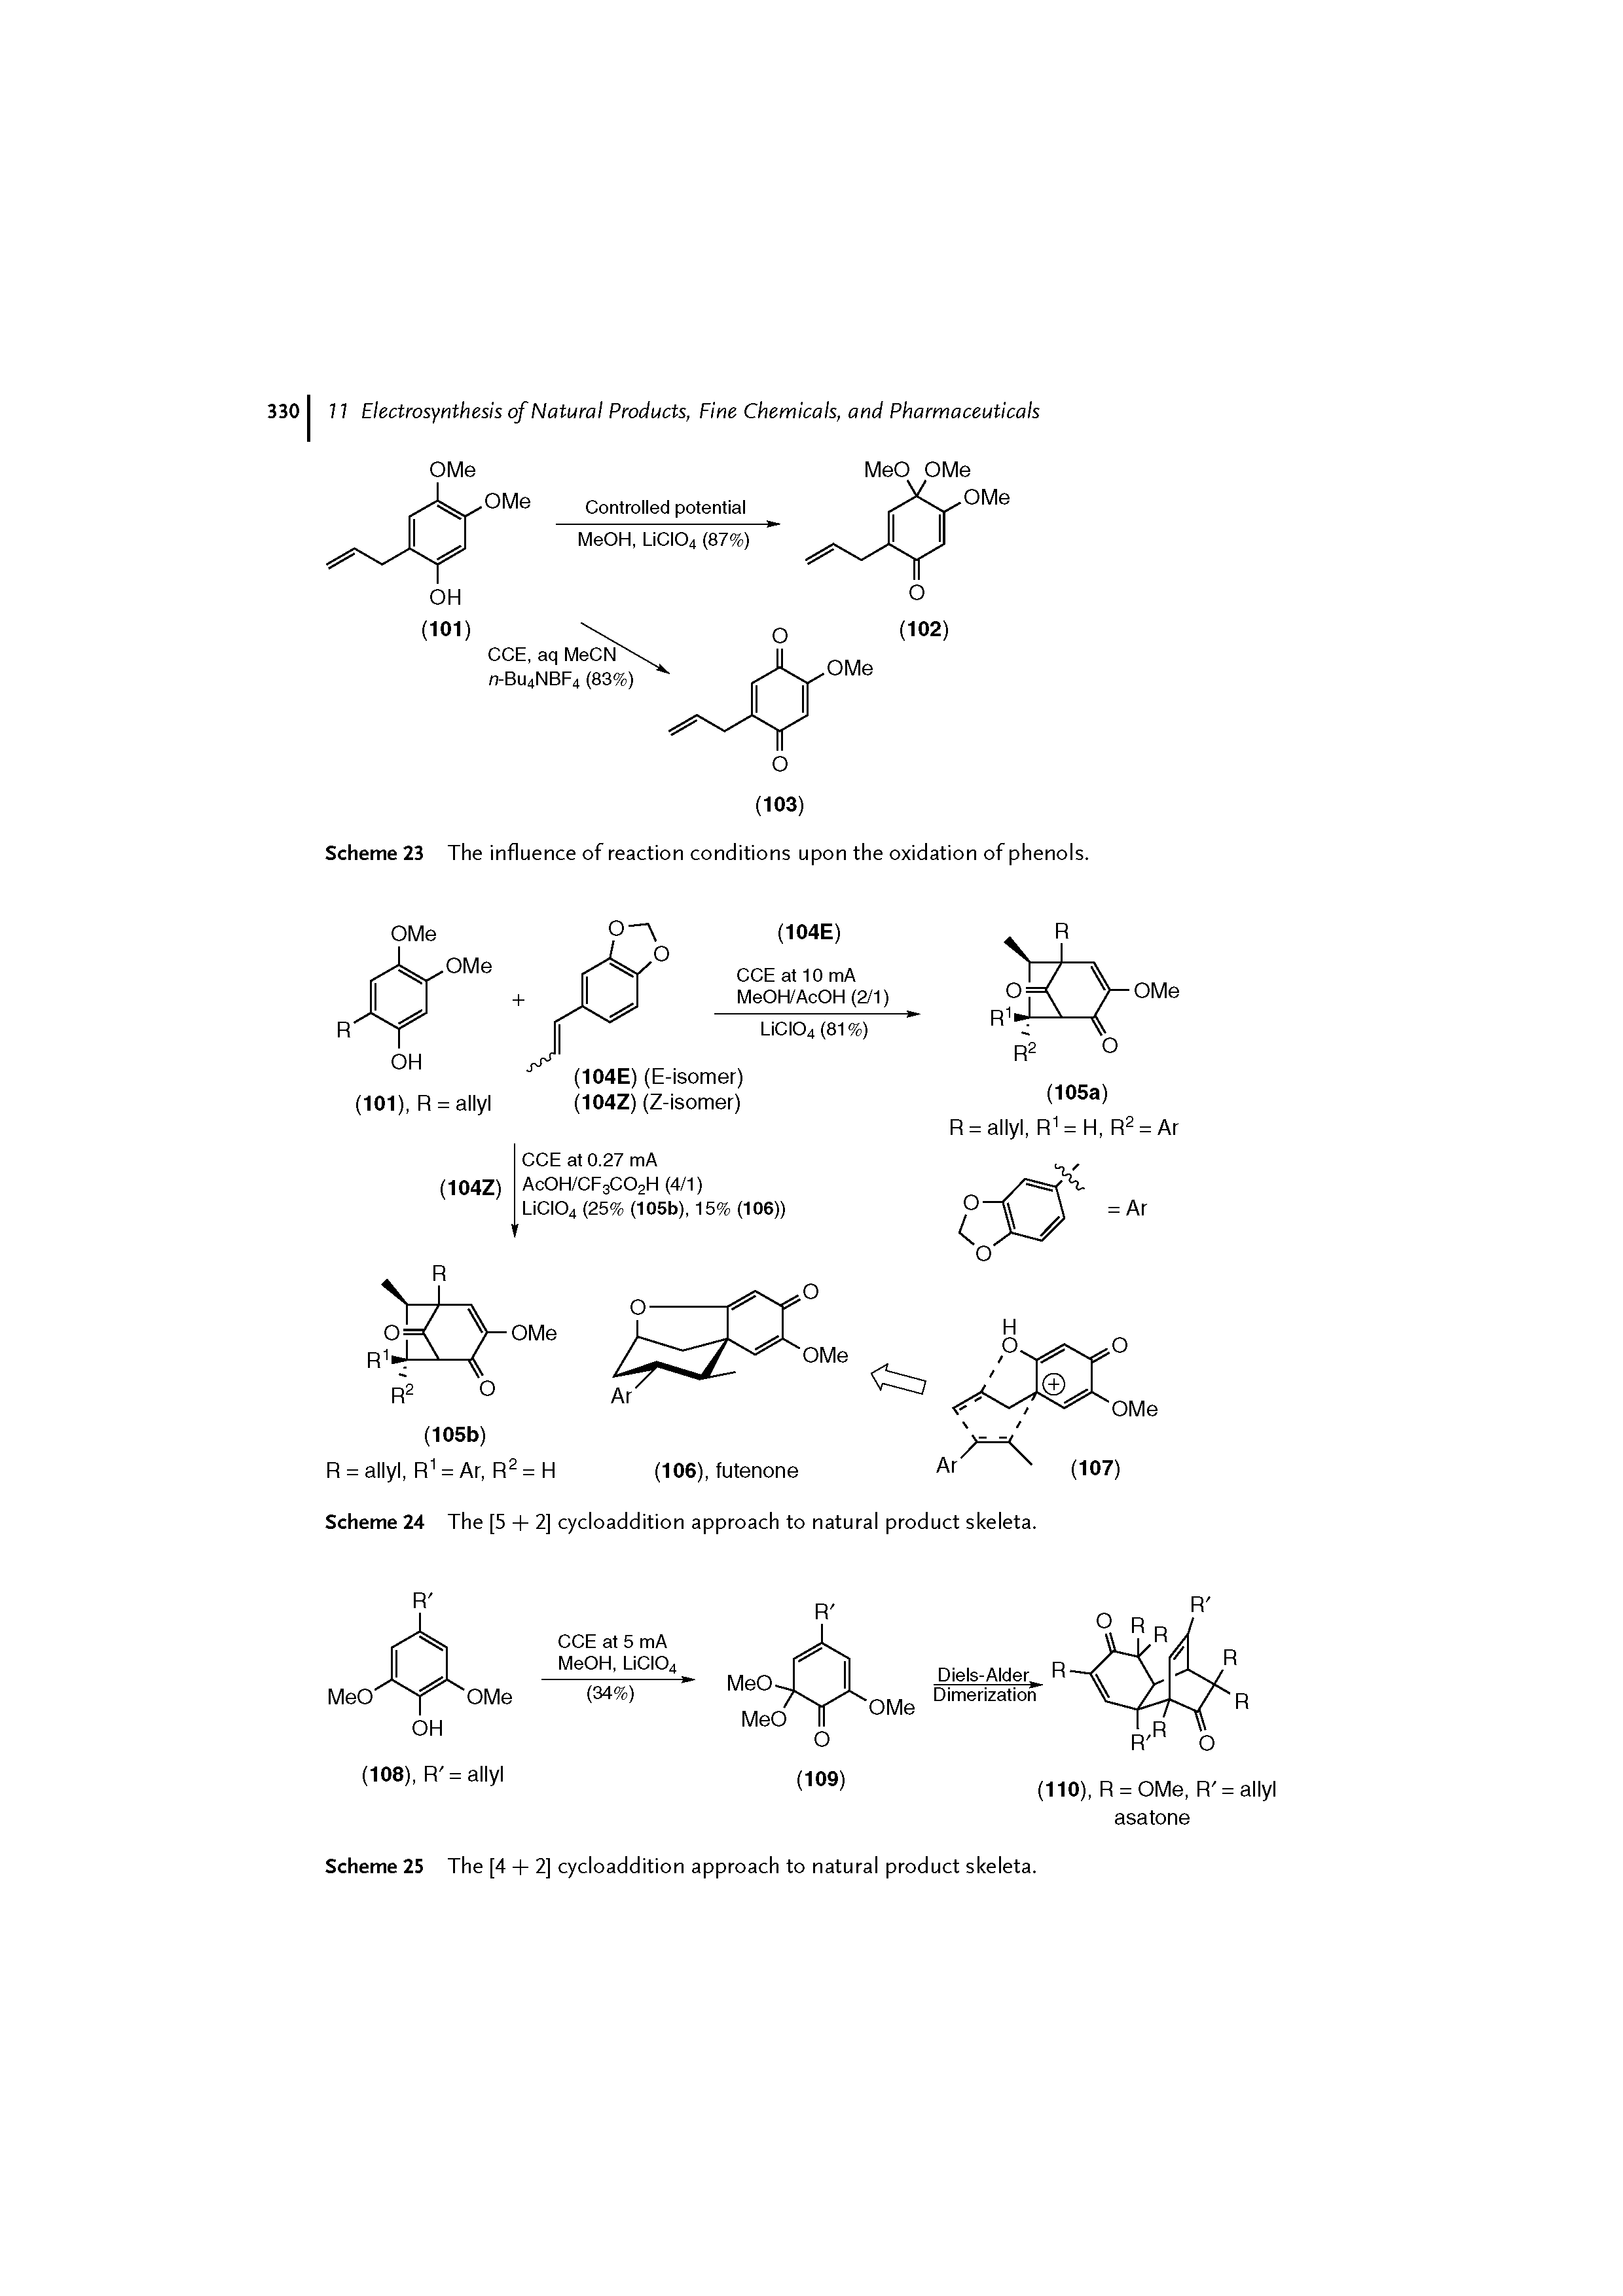 Scheme 23 The influence of reaction conditions upon the oxidation of phenols.